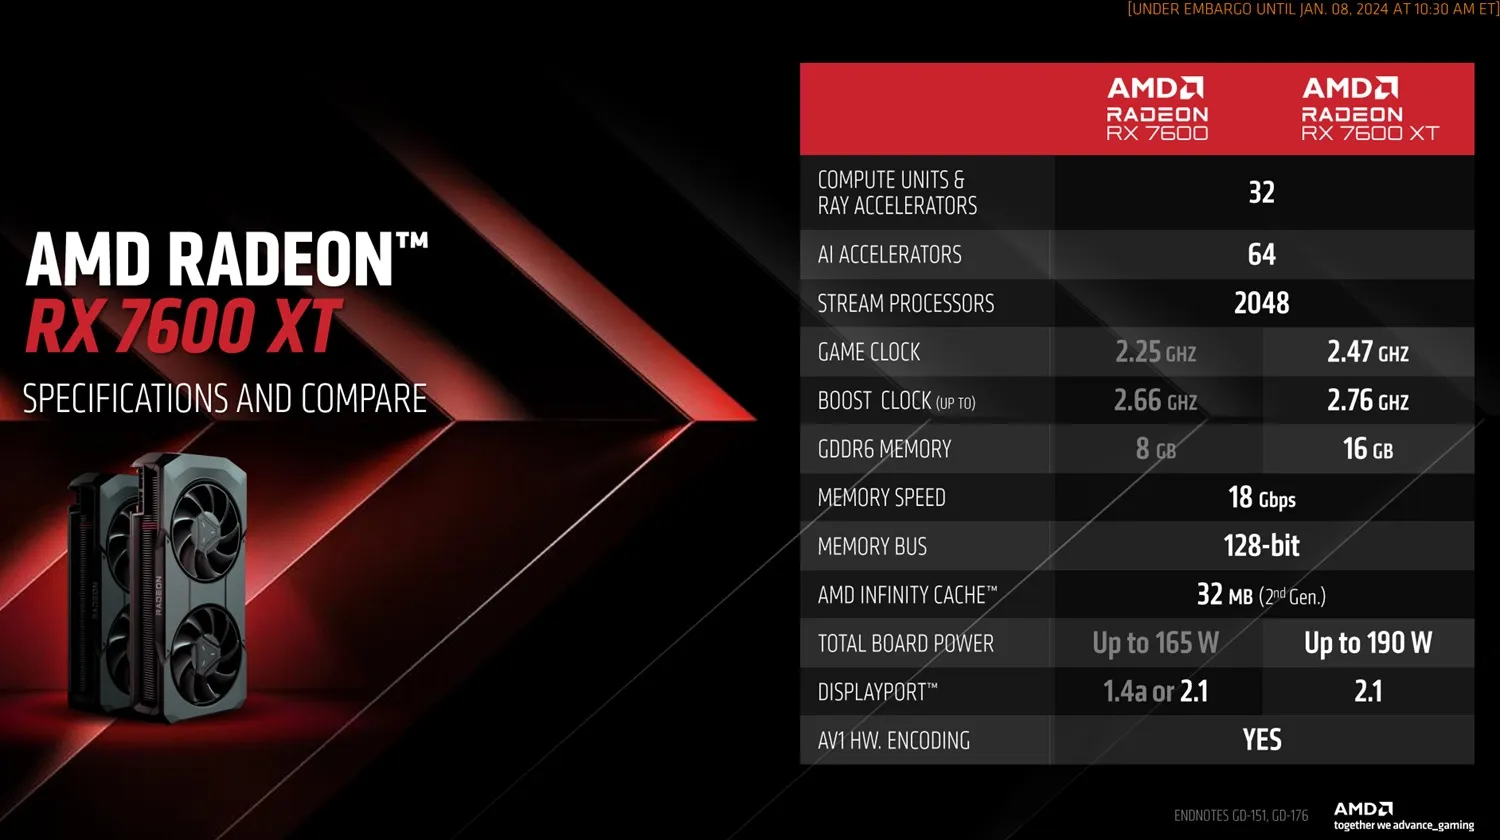 Specs for the AMD RX 7600 XT.